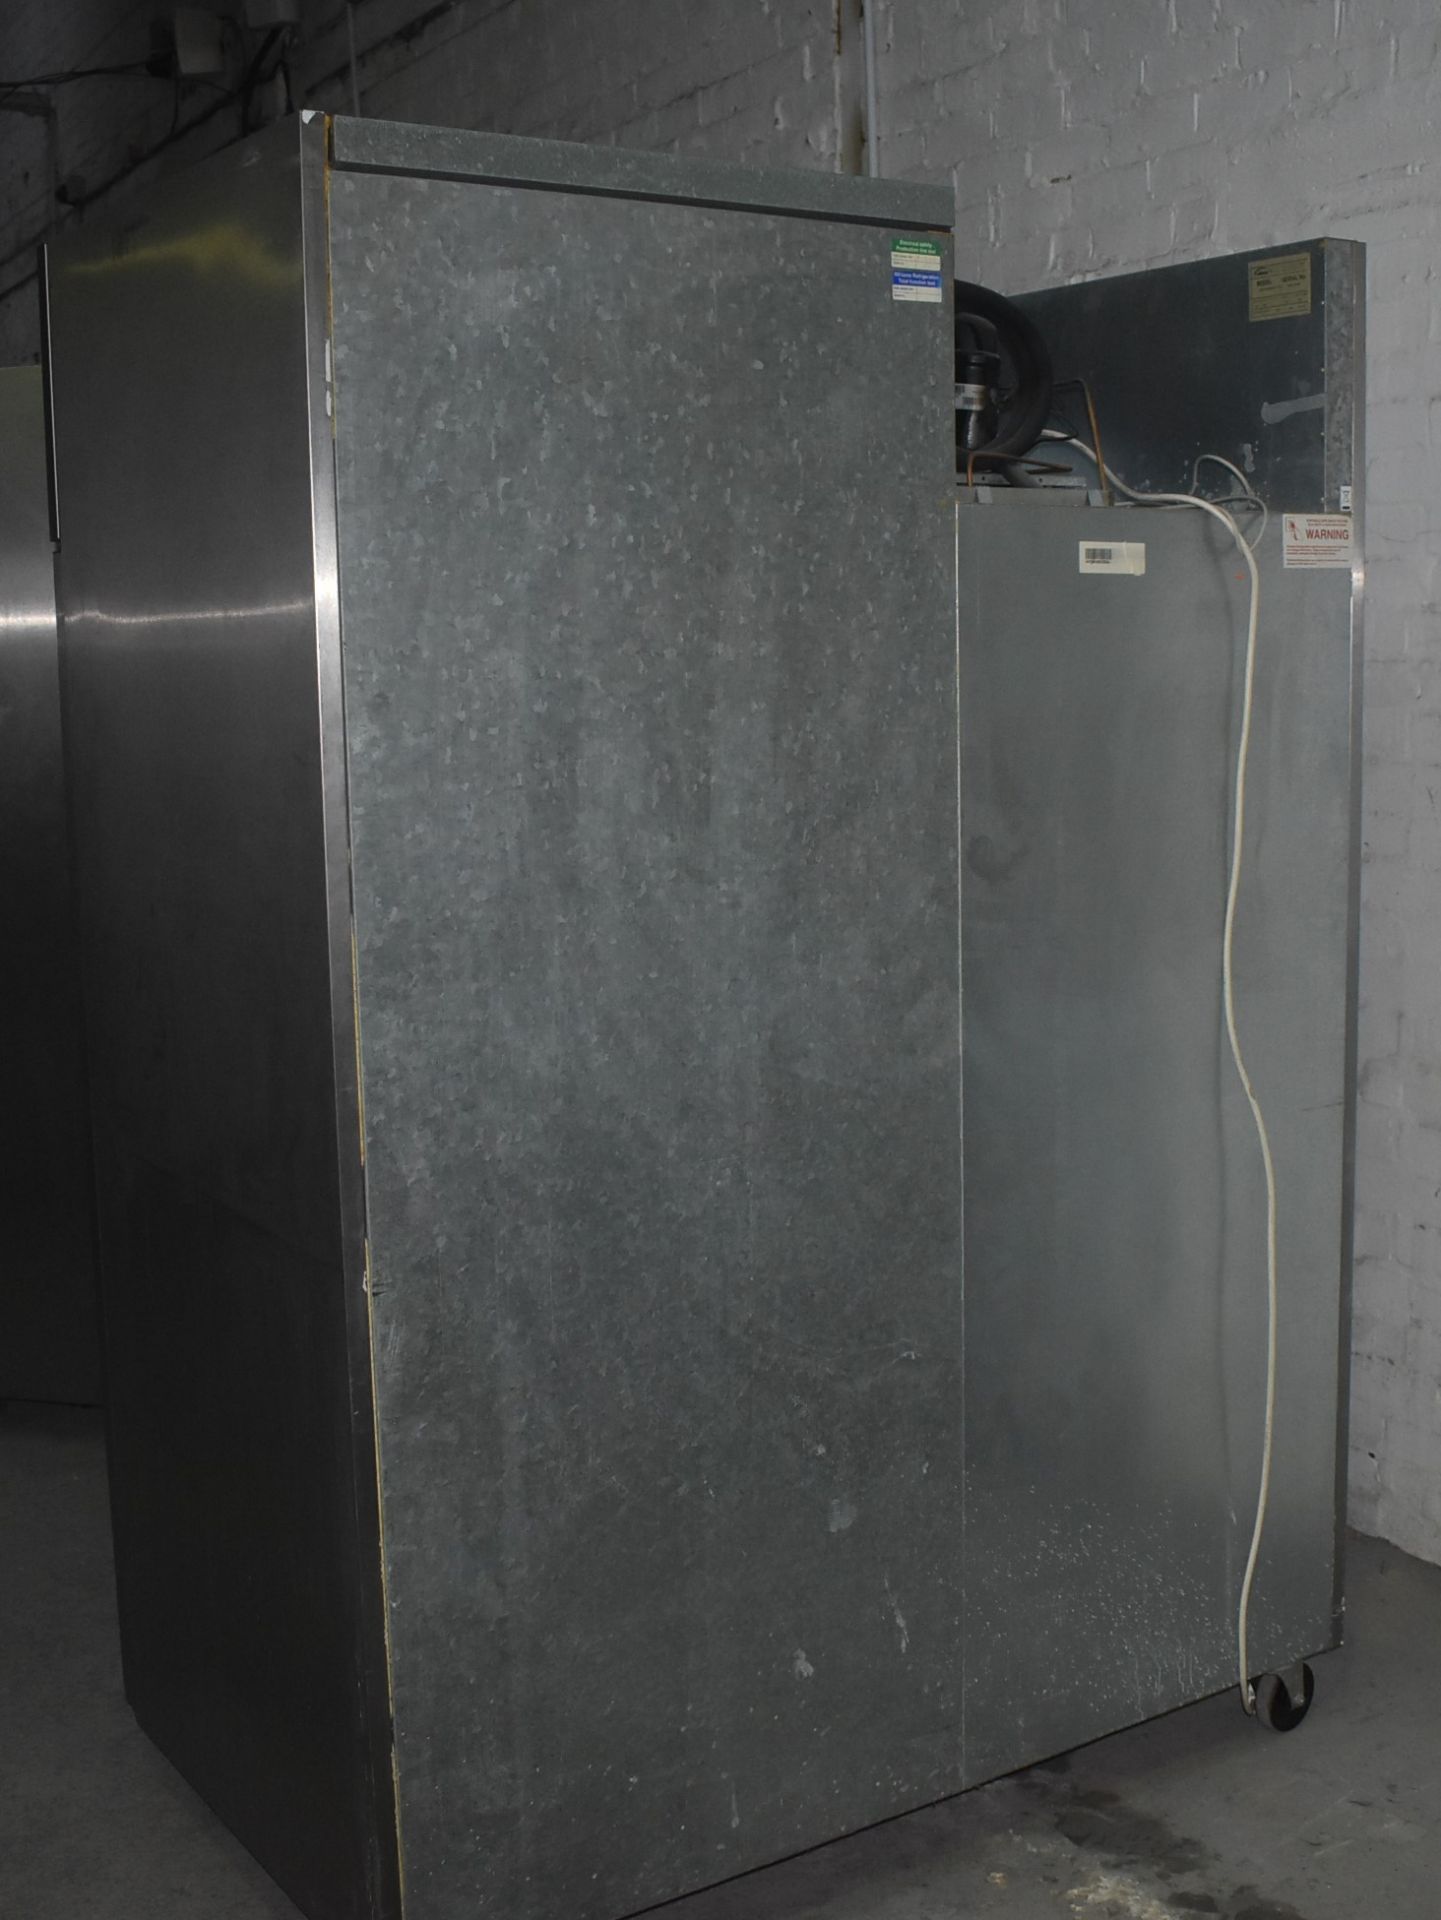 1 x Williams Double Door Upright Refrigerator - Model MJ2SA - Recently Removed From Major - Image 6 of 7